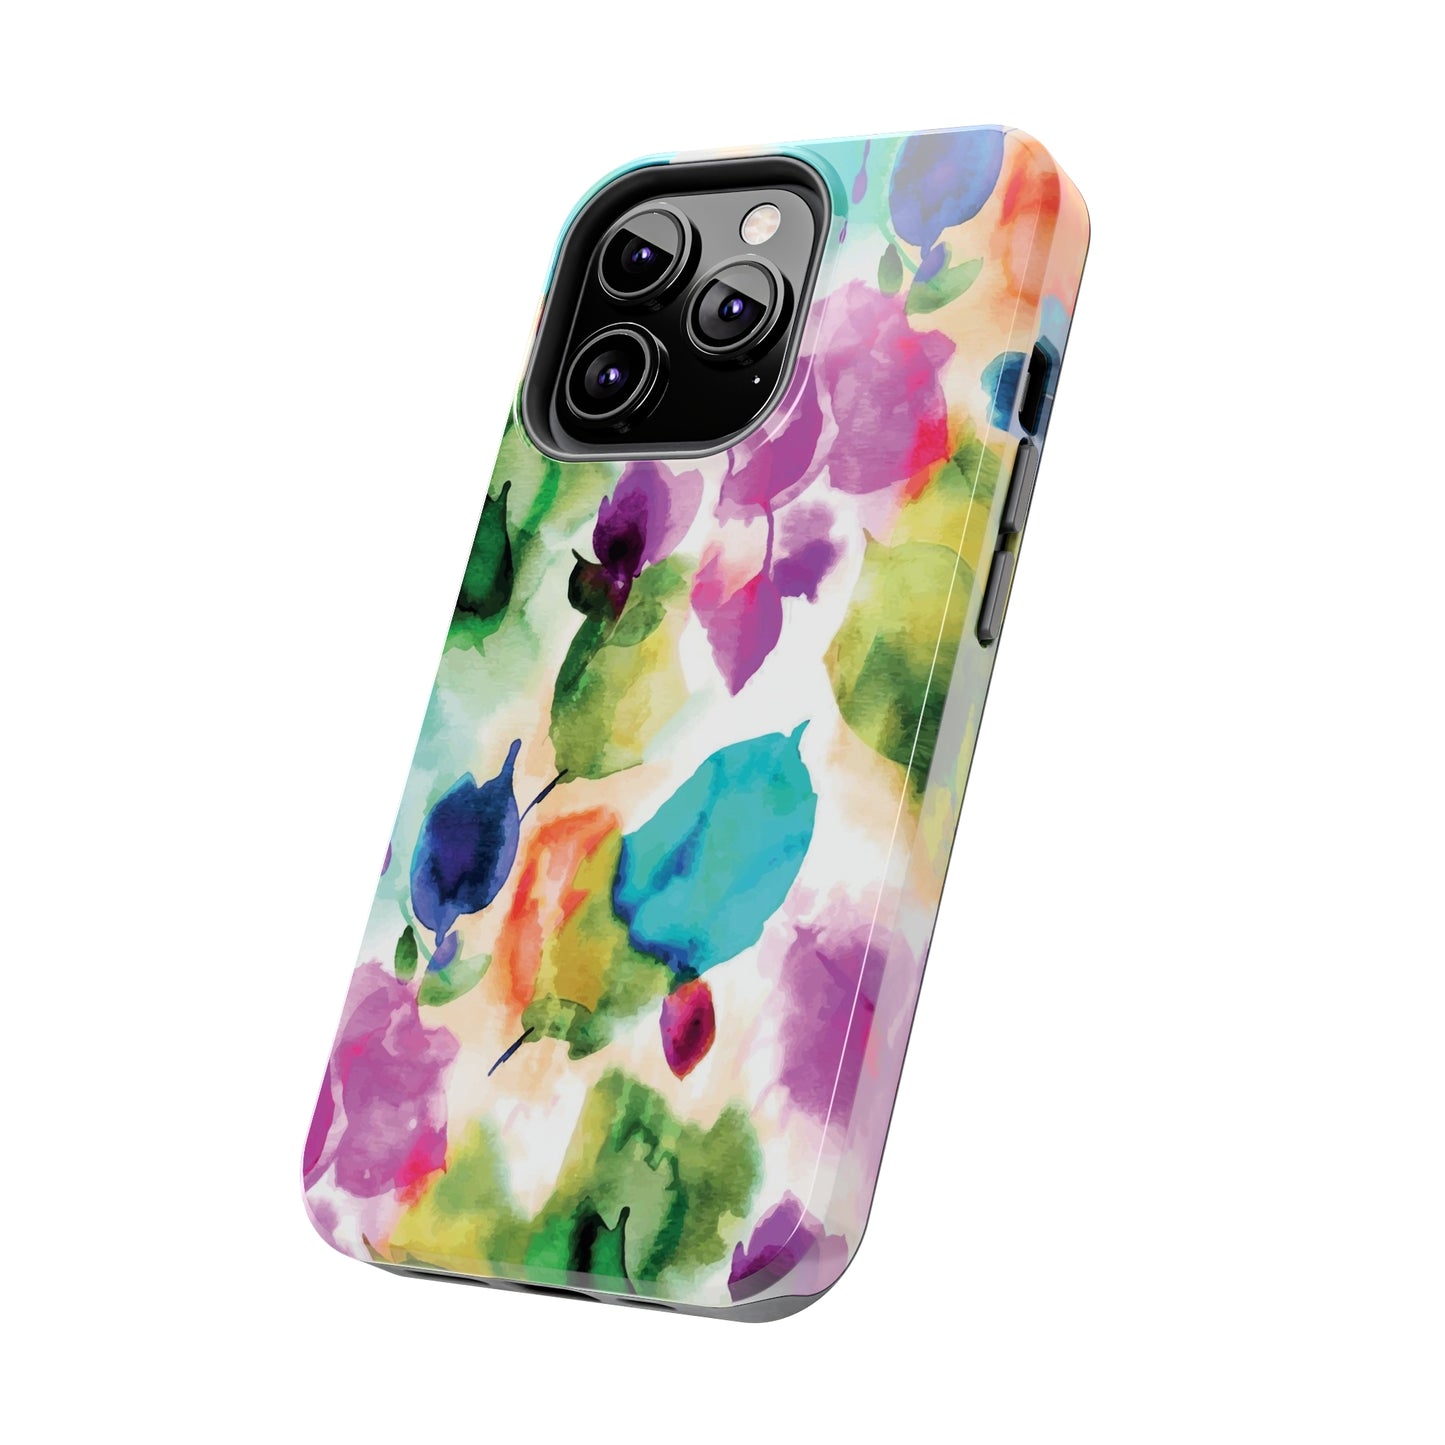 Tie Dye Watercolor Flowers Only / iPhone Case